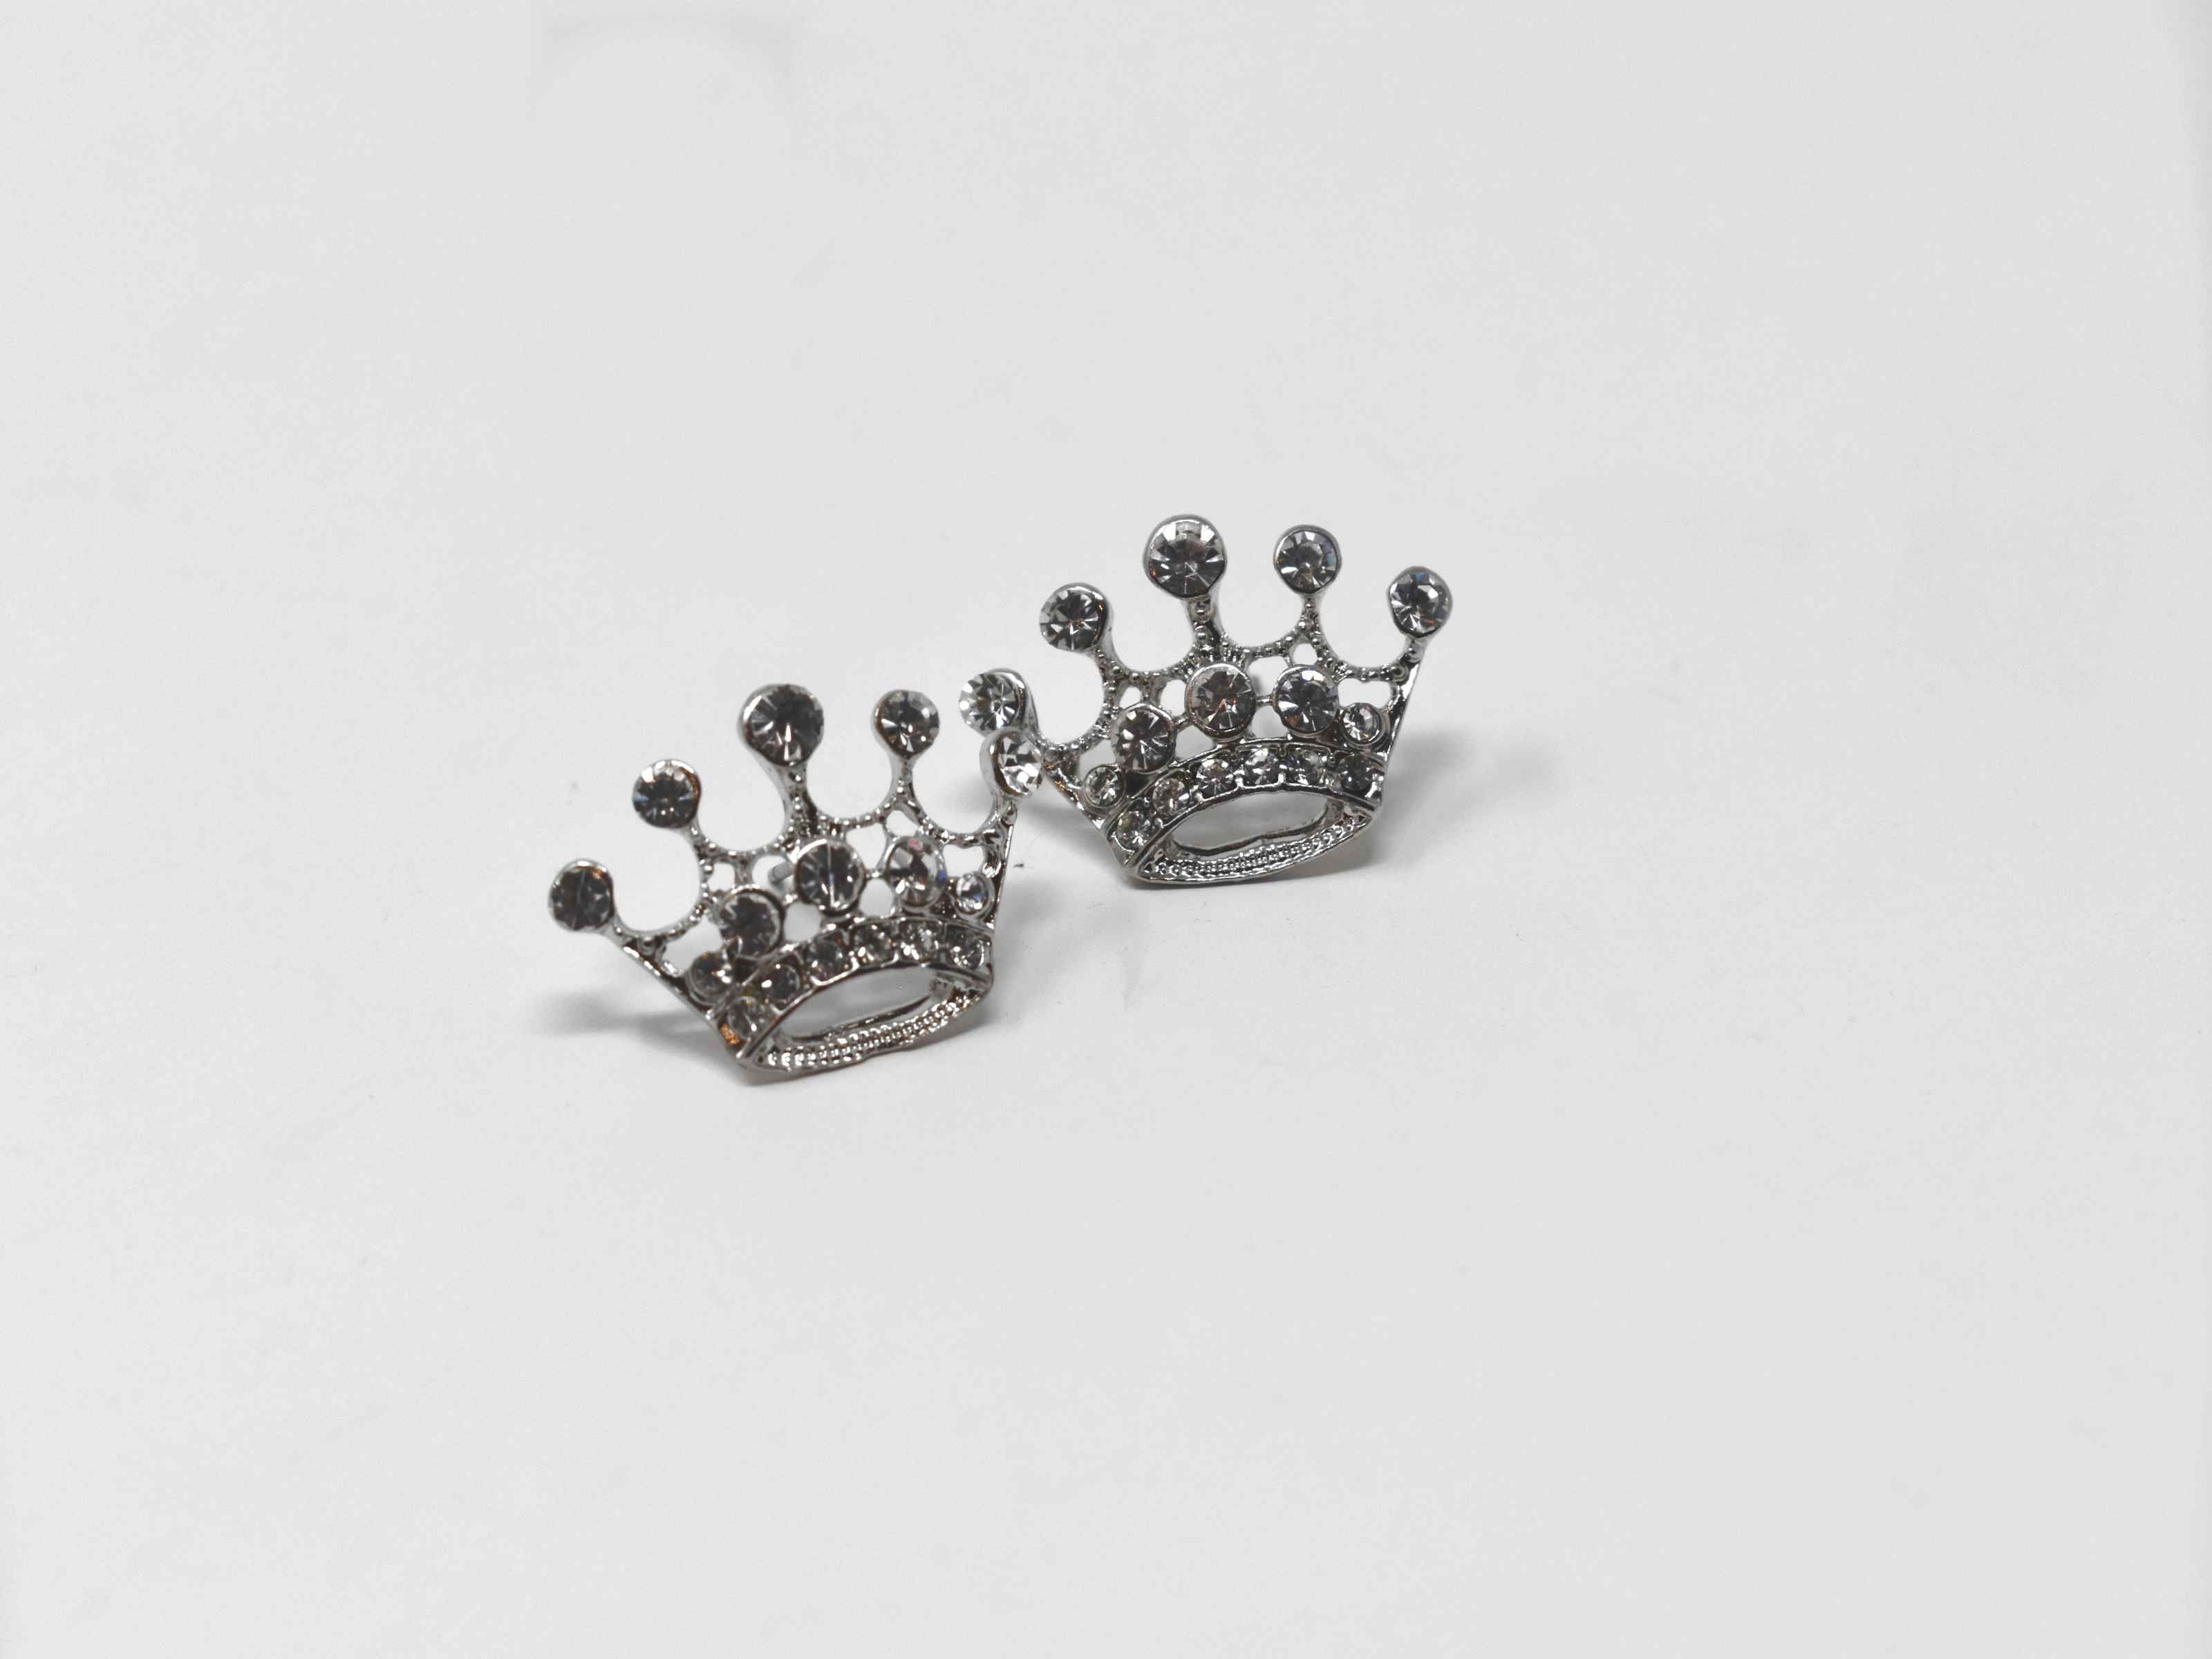 Let our queens cup be your new essential go to staple. These silver knob crown shaped earrings are encrusted with stones, 1/2 an inch in length with a pushback clasp.